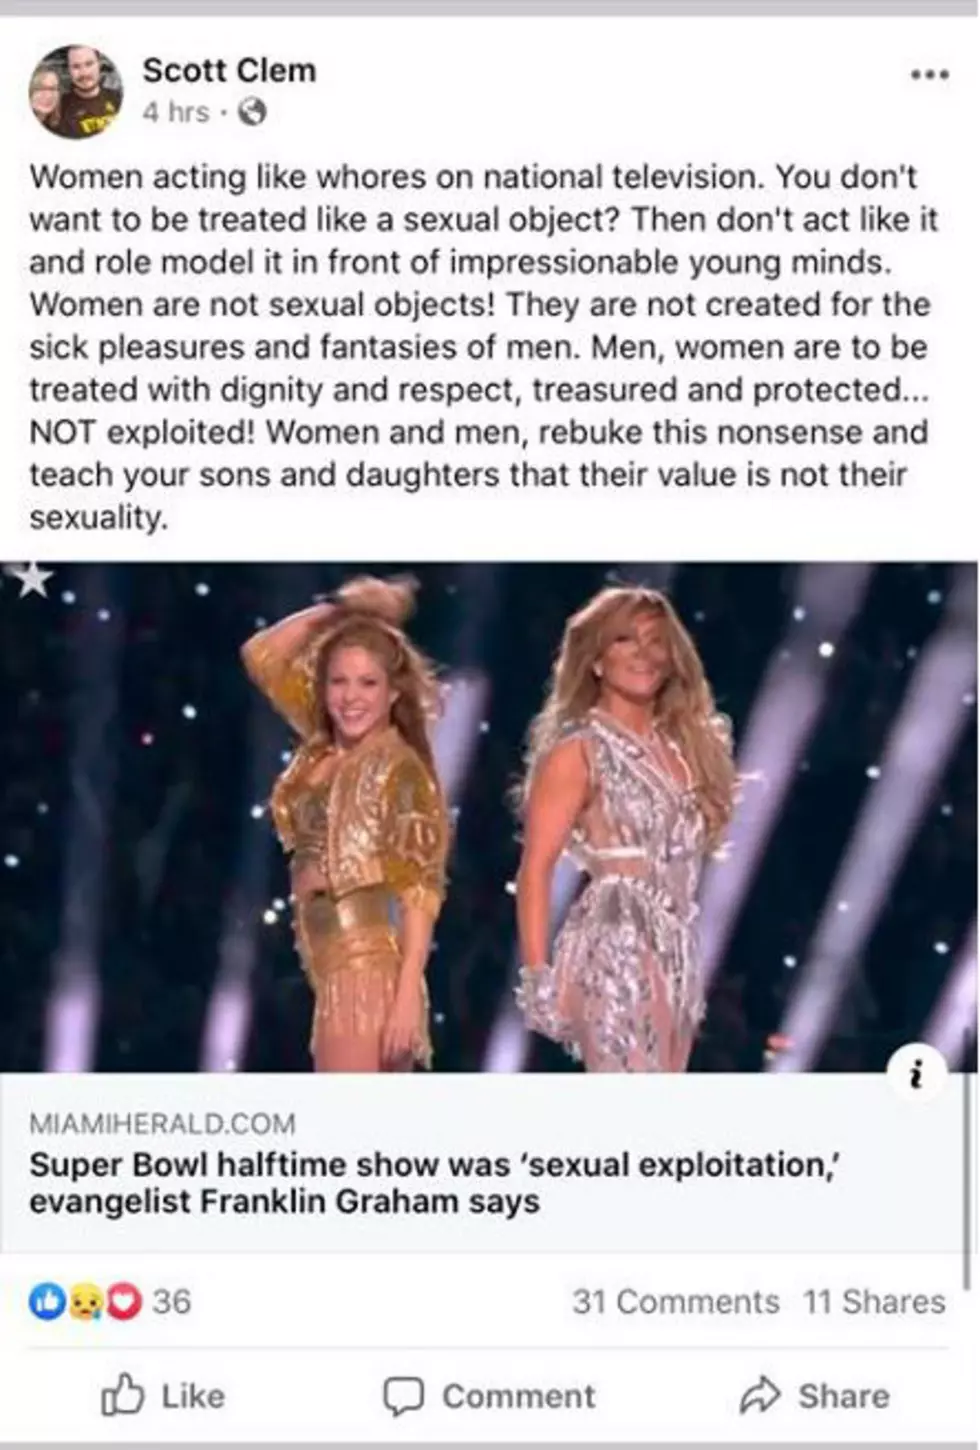 Wyo. Lawmaker: Super Bowl Halftime Performers Acted ‘Like Whores’